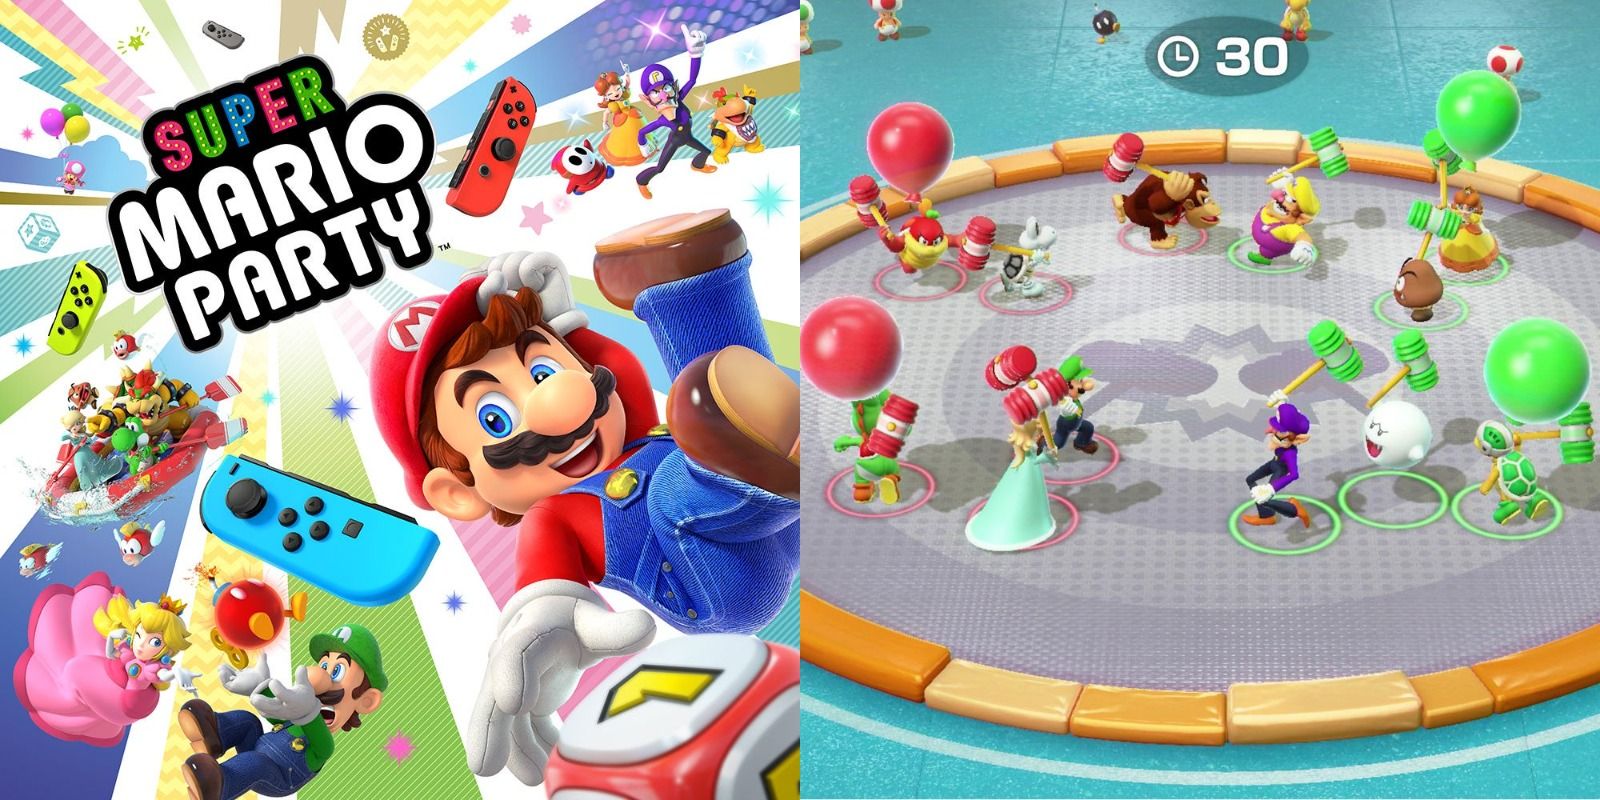 Super Mario Party for the Nintendo Switch